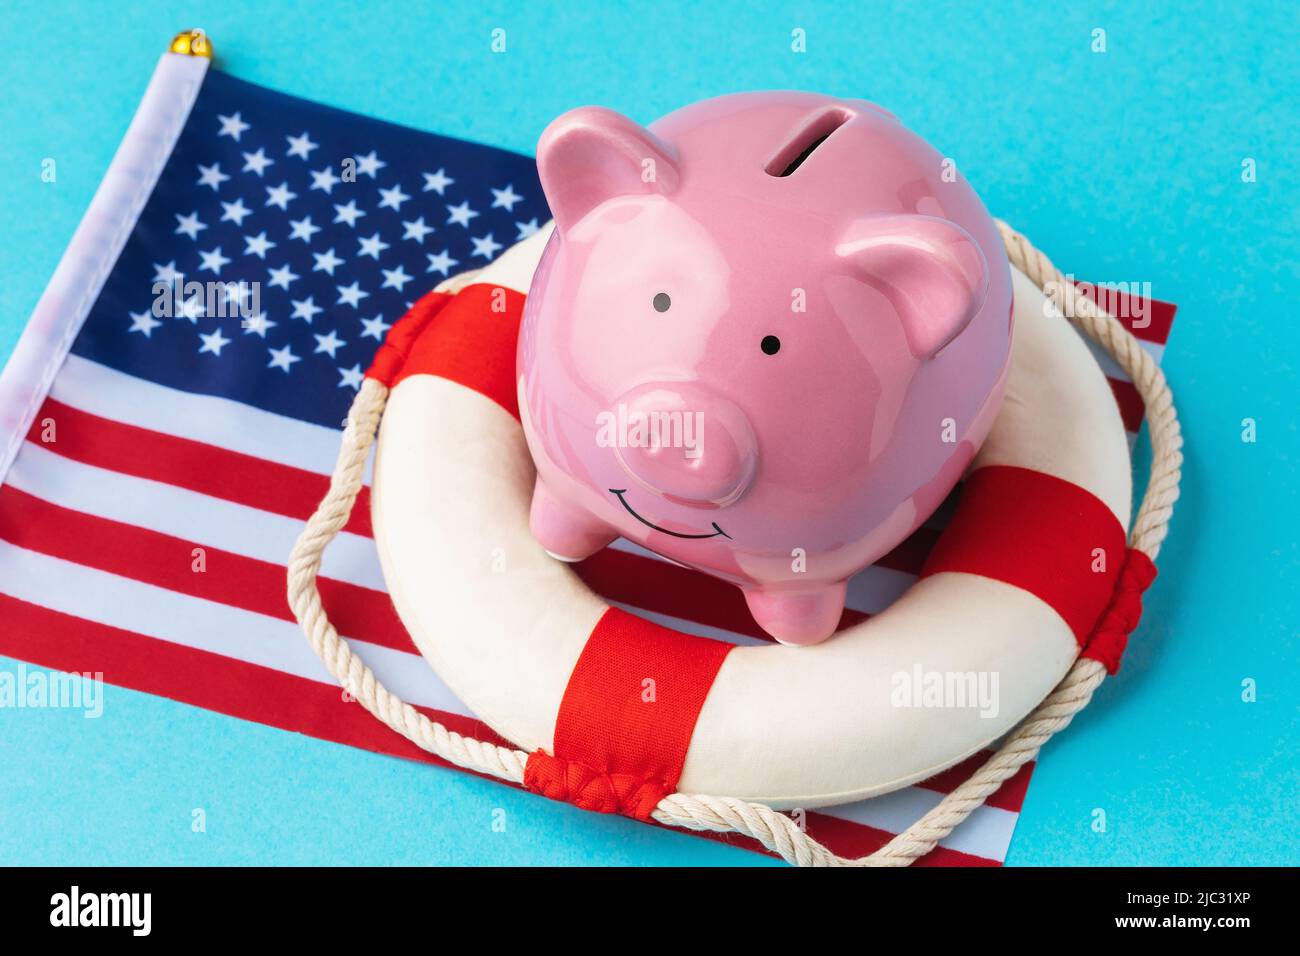 Piggy bank, lifebuoy and flag on a blue background, the concept of saving the American economy Stock Photo